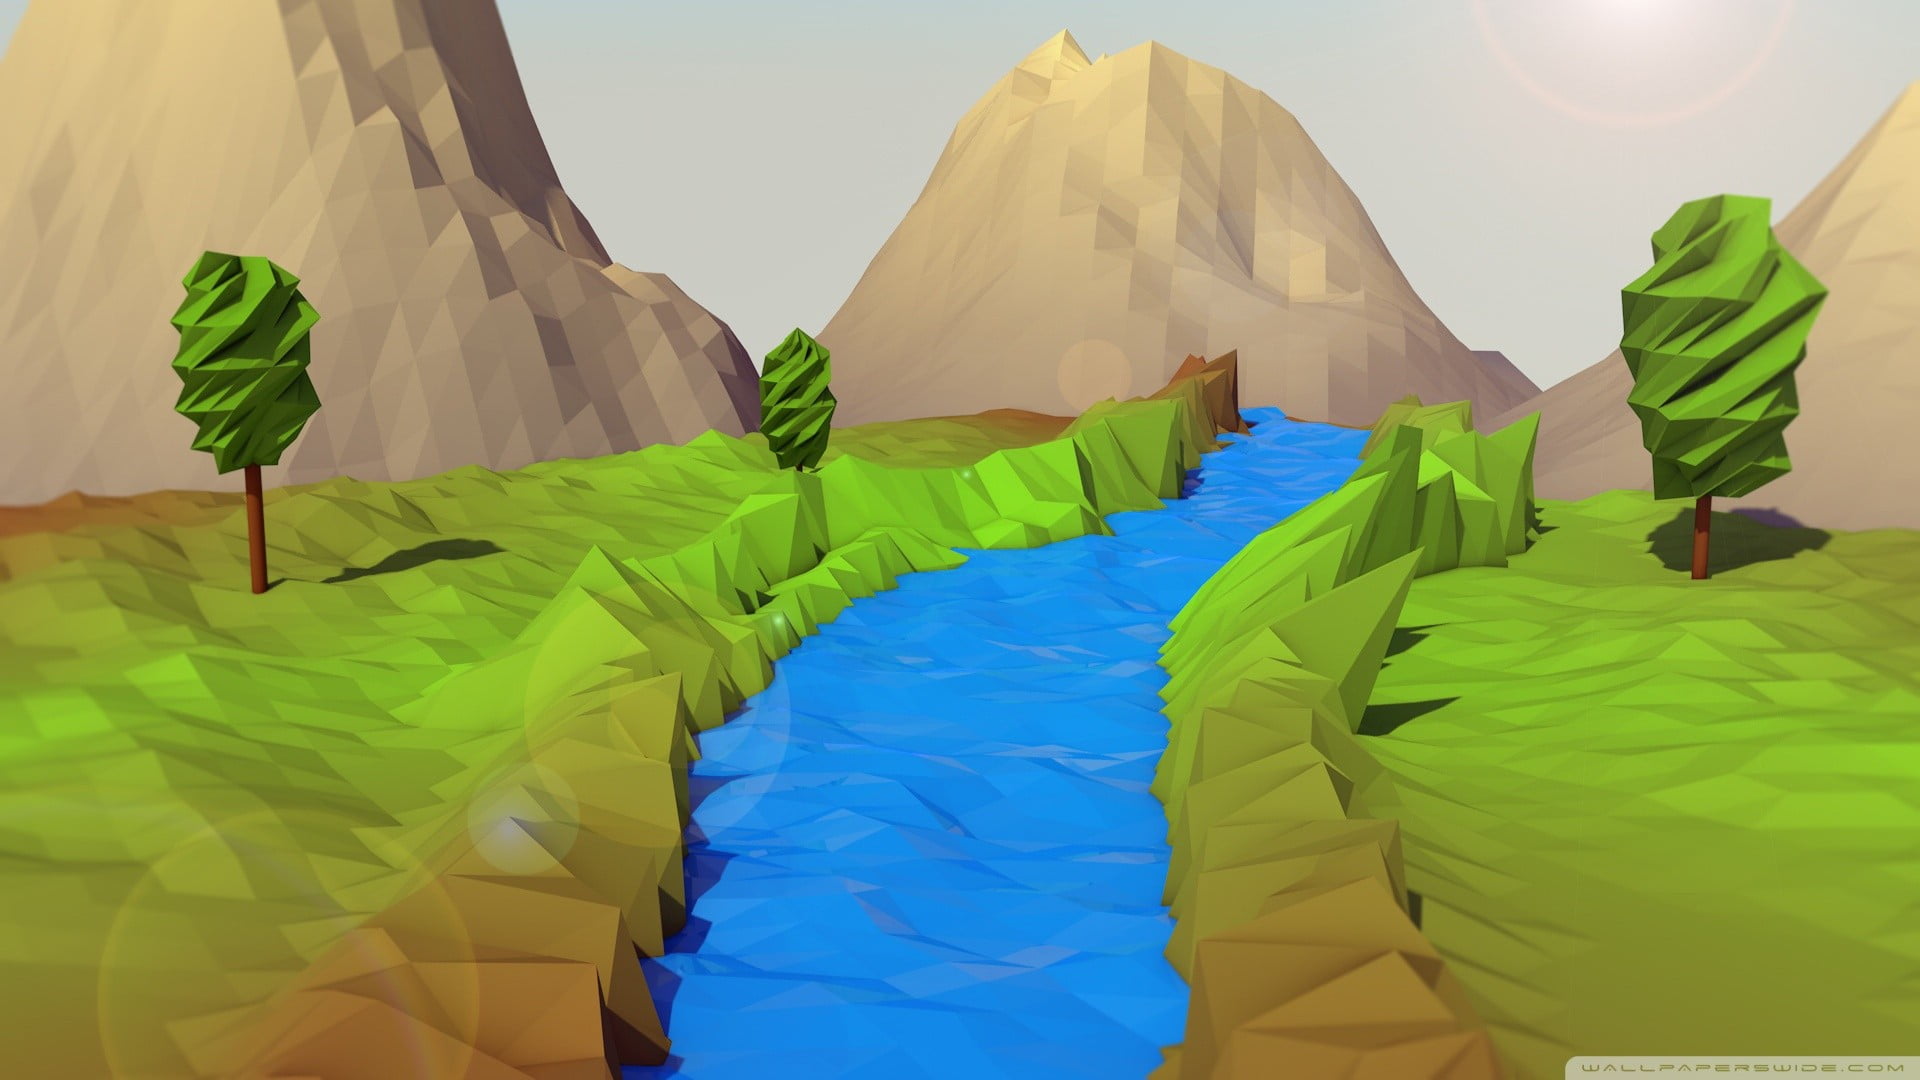 body of water illustration, digital art, low poly, green color